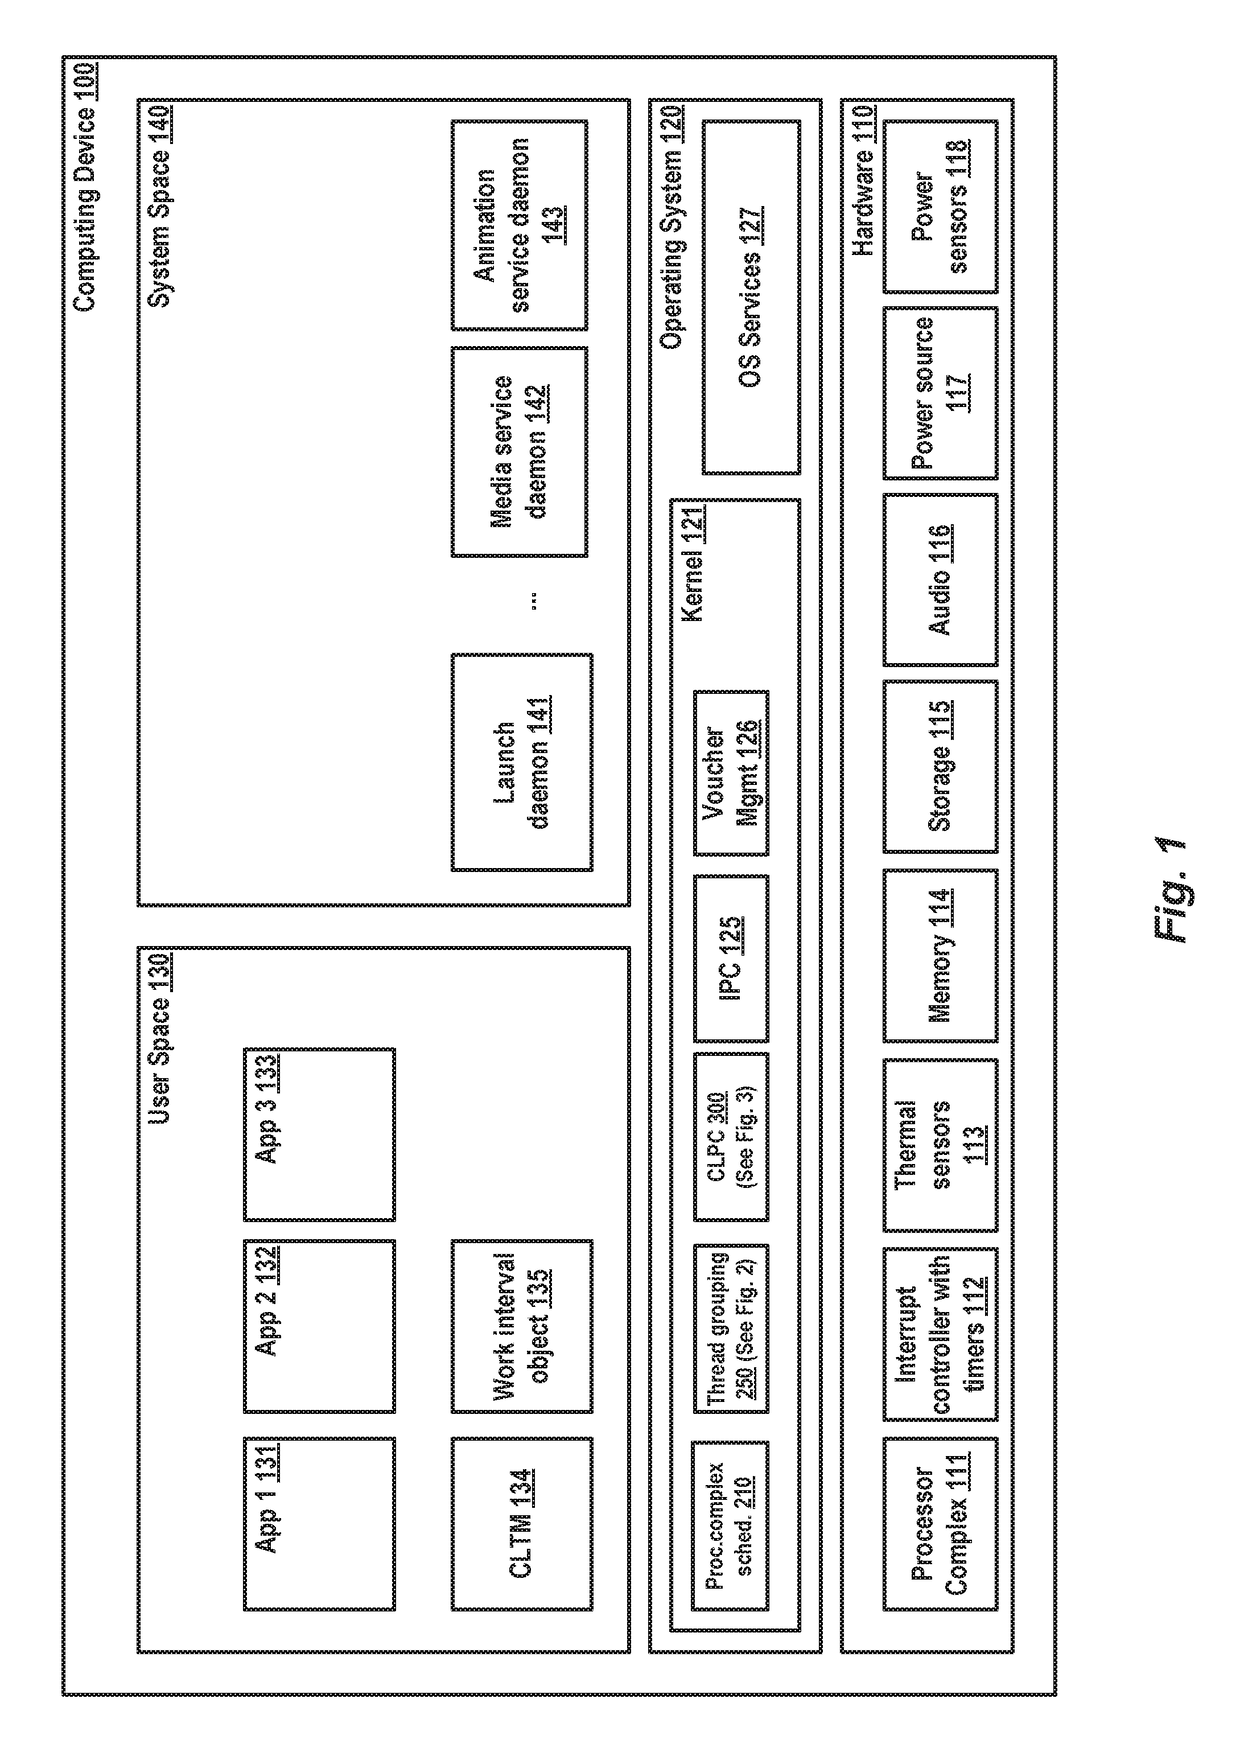 Scheduling of work interval objects in an amp architecture using a closed loop performance controller